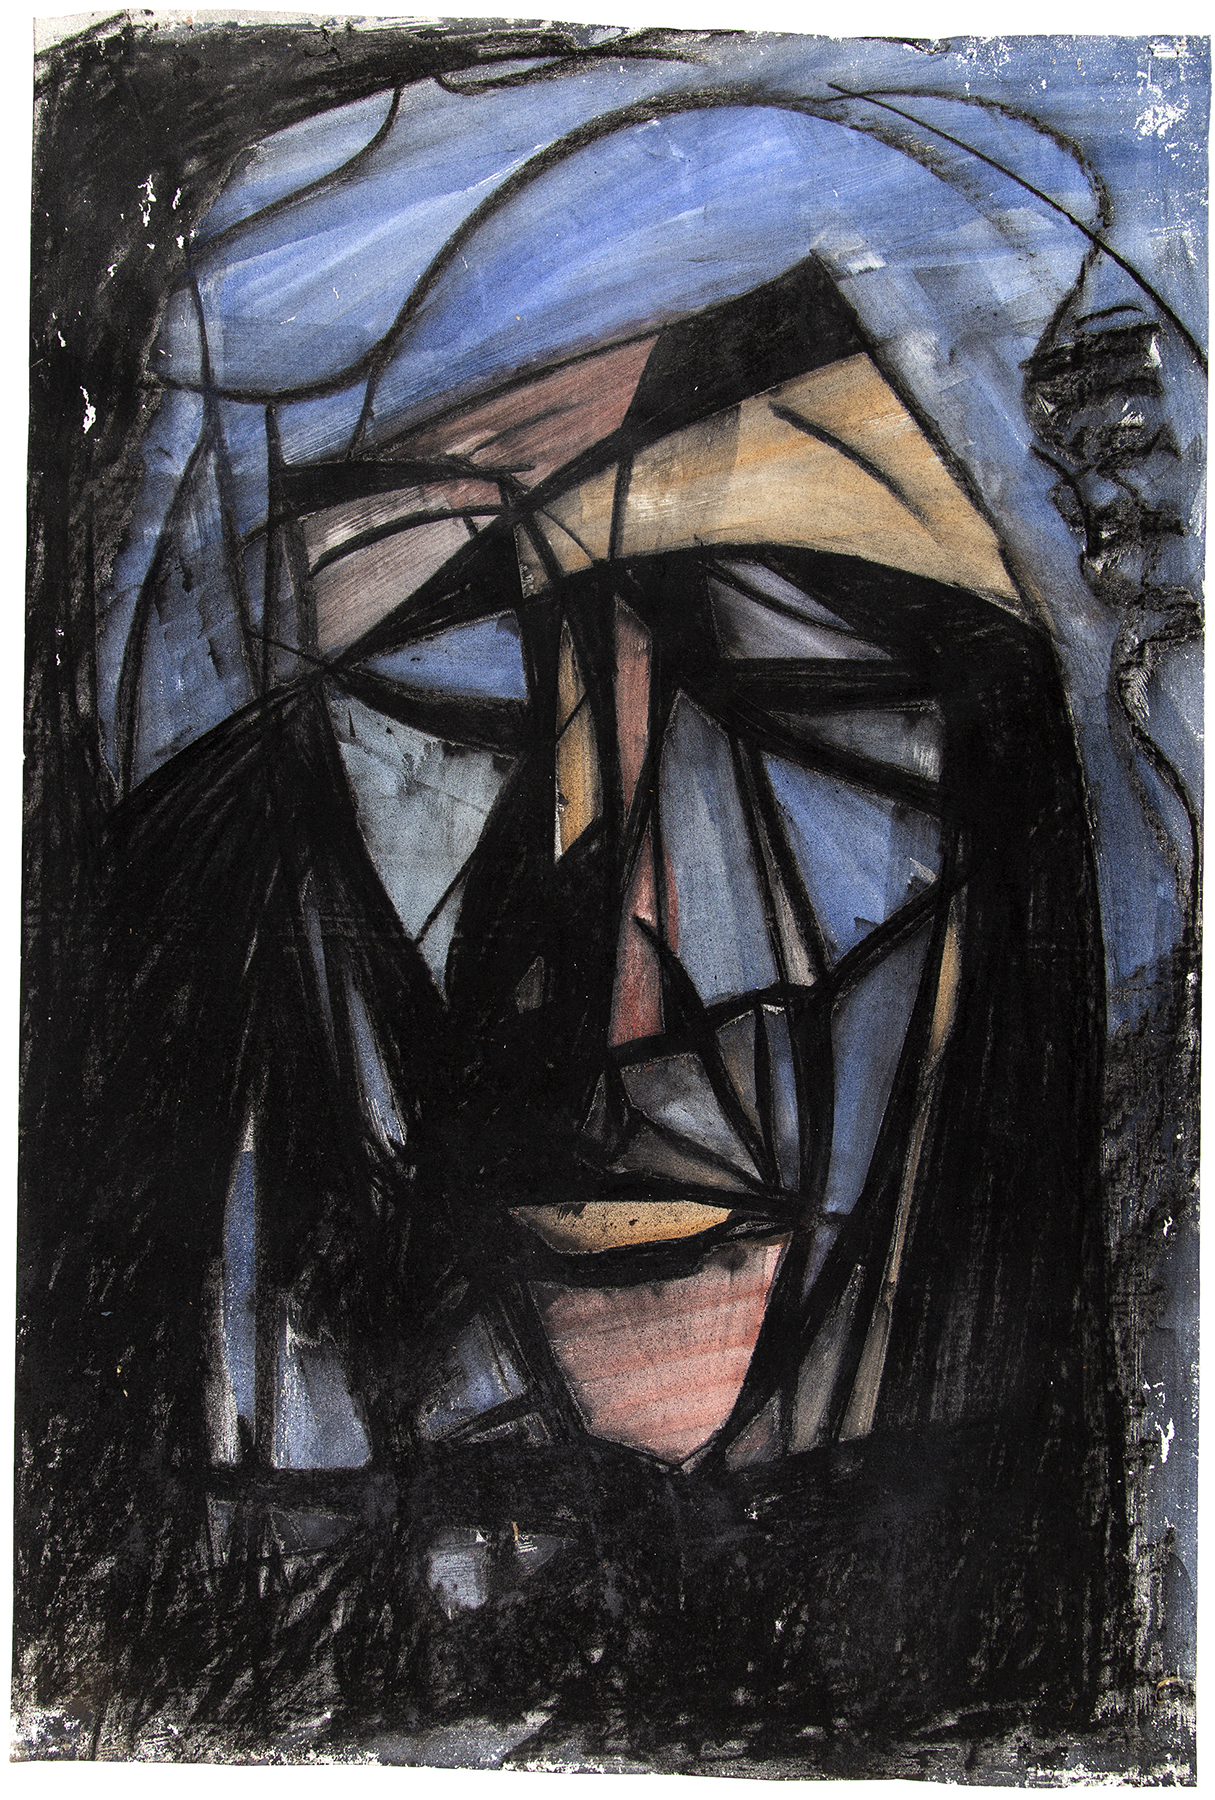 Abstract drawing of a figure's face in black, blue and peach